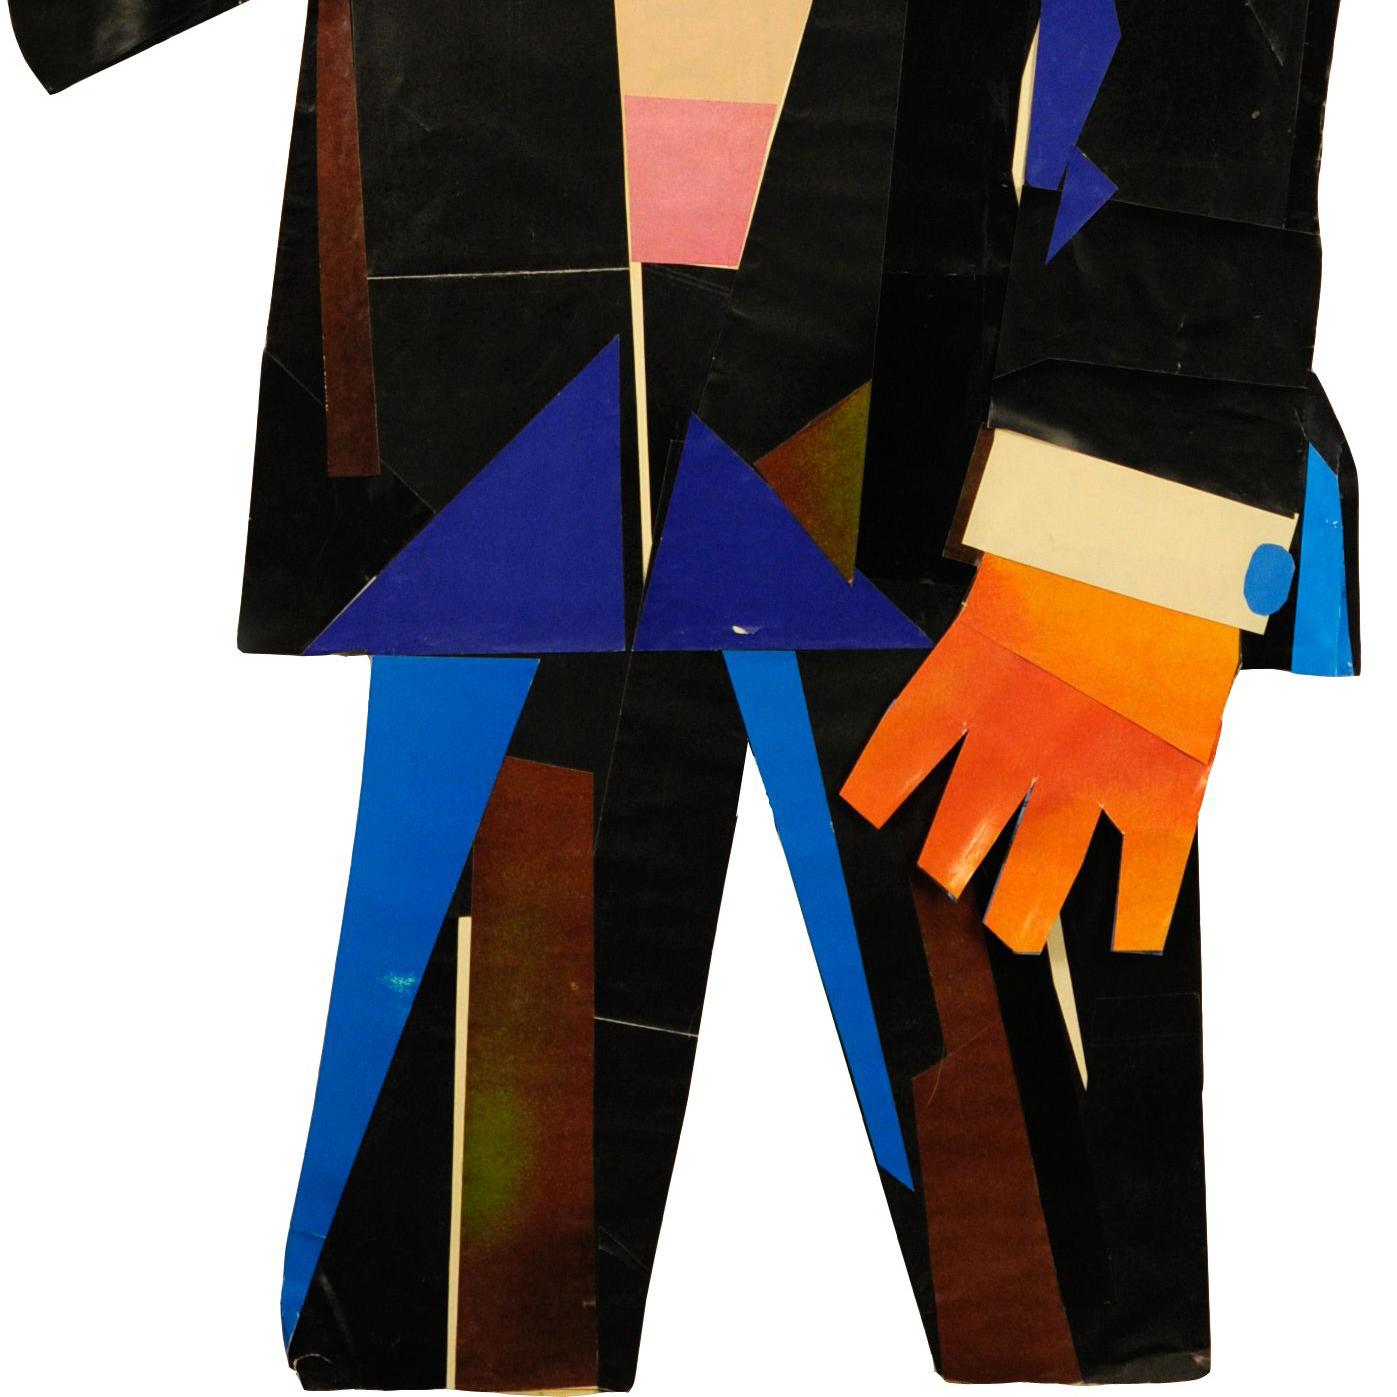 Jazz Singer
Mixed media 3 dimensional collage sculpture, 1975
Although dated 1975, this work may well have been done in the 1980s.  Longstreet dated his works for the period they represented, not necessarily the date of actual execution.
Dimensions: